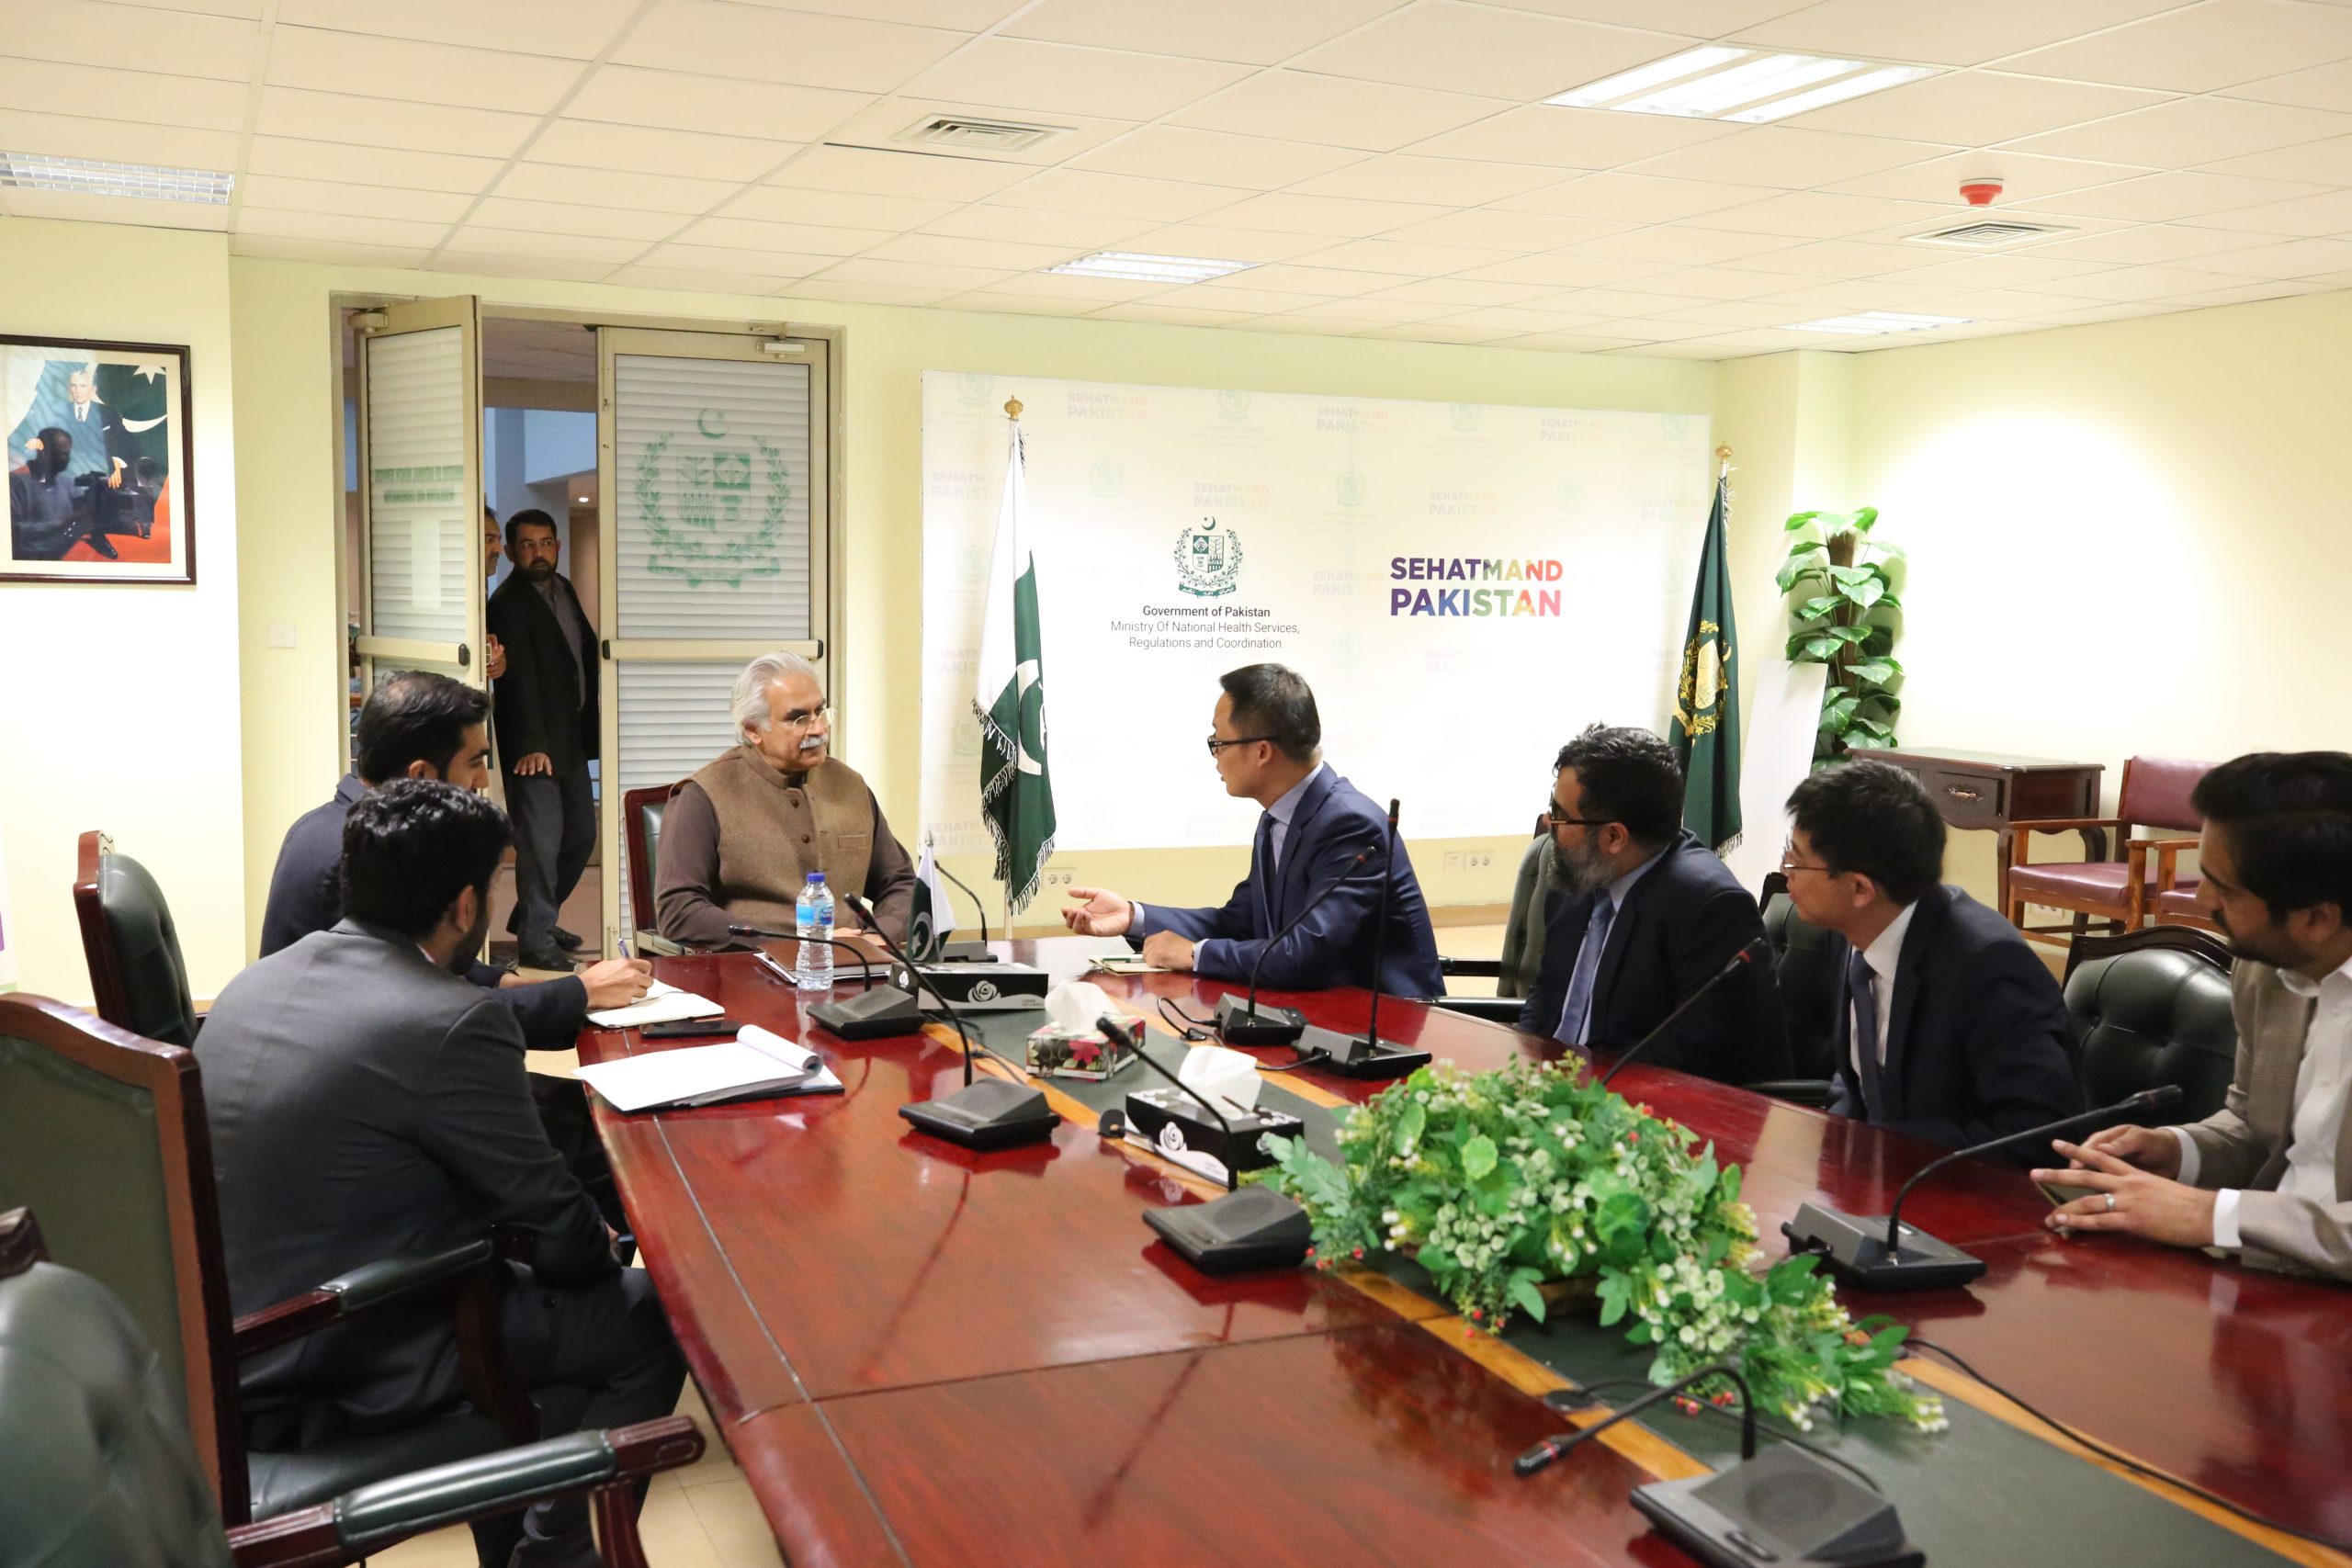 Huawei Pakistan Provides video conference System To Ministry Of National Health Services (MNHS), Regulations and Coordination of Pakistan To Fight COVID-19